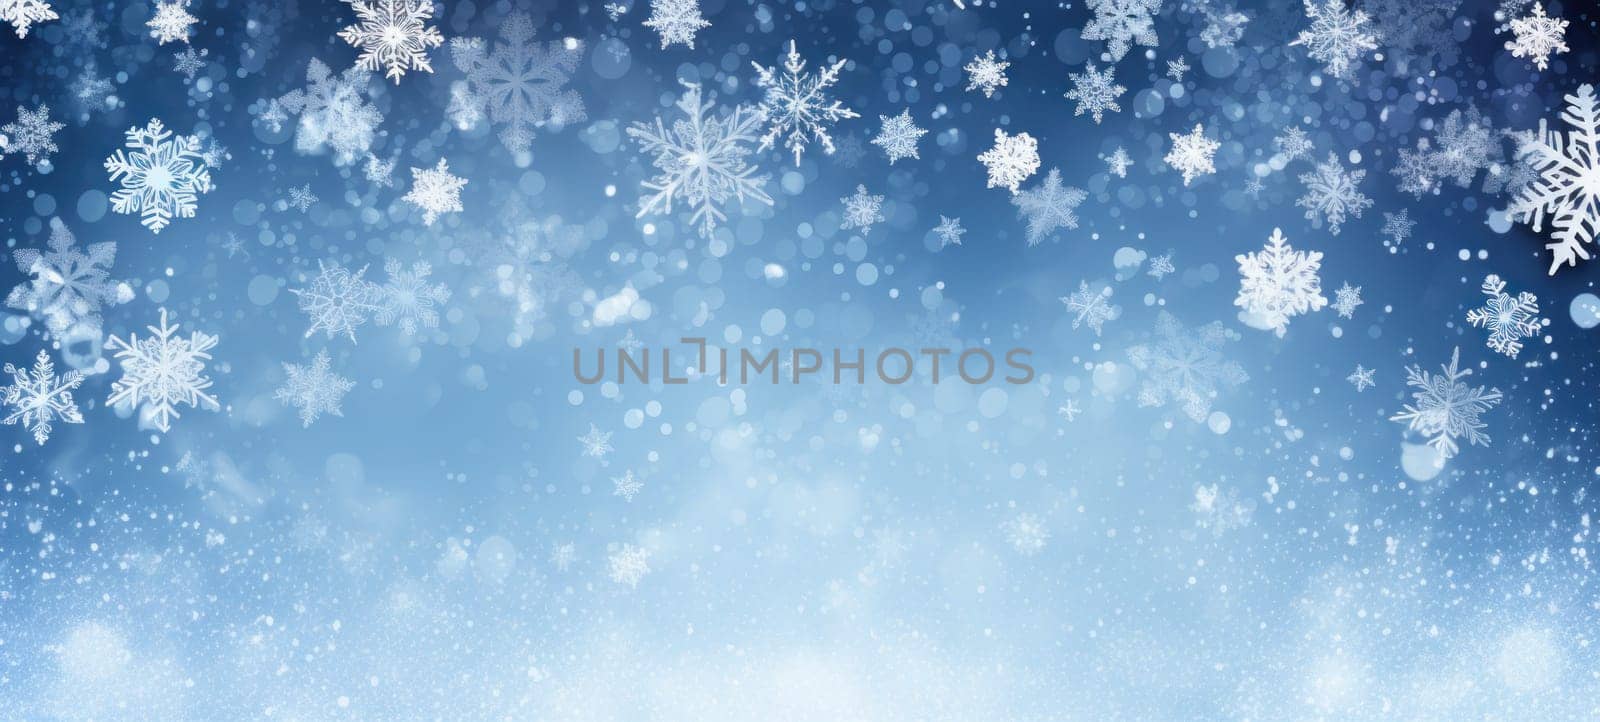 Abstract background with random falling snow flakes on blue background. Festive winter background for card, flyer, invitation, placard, voucher, banner